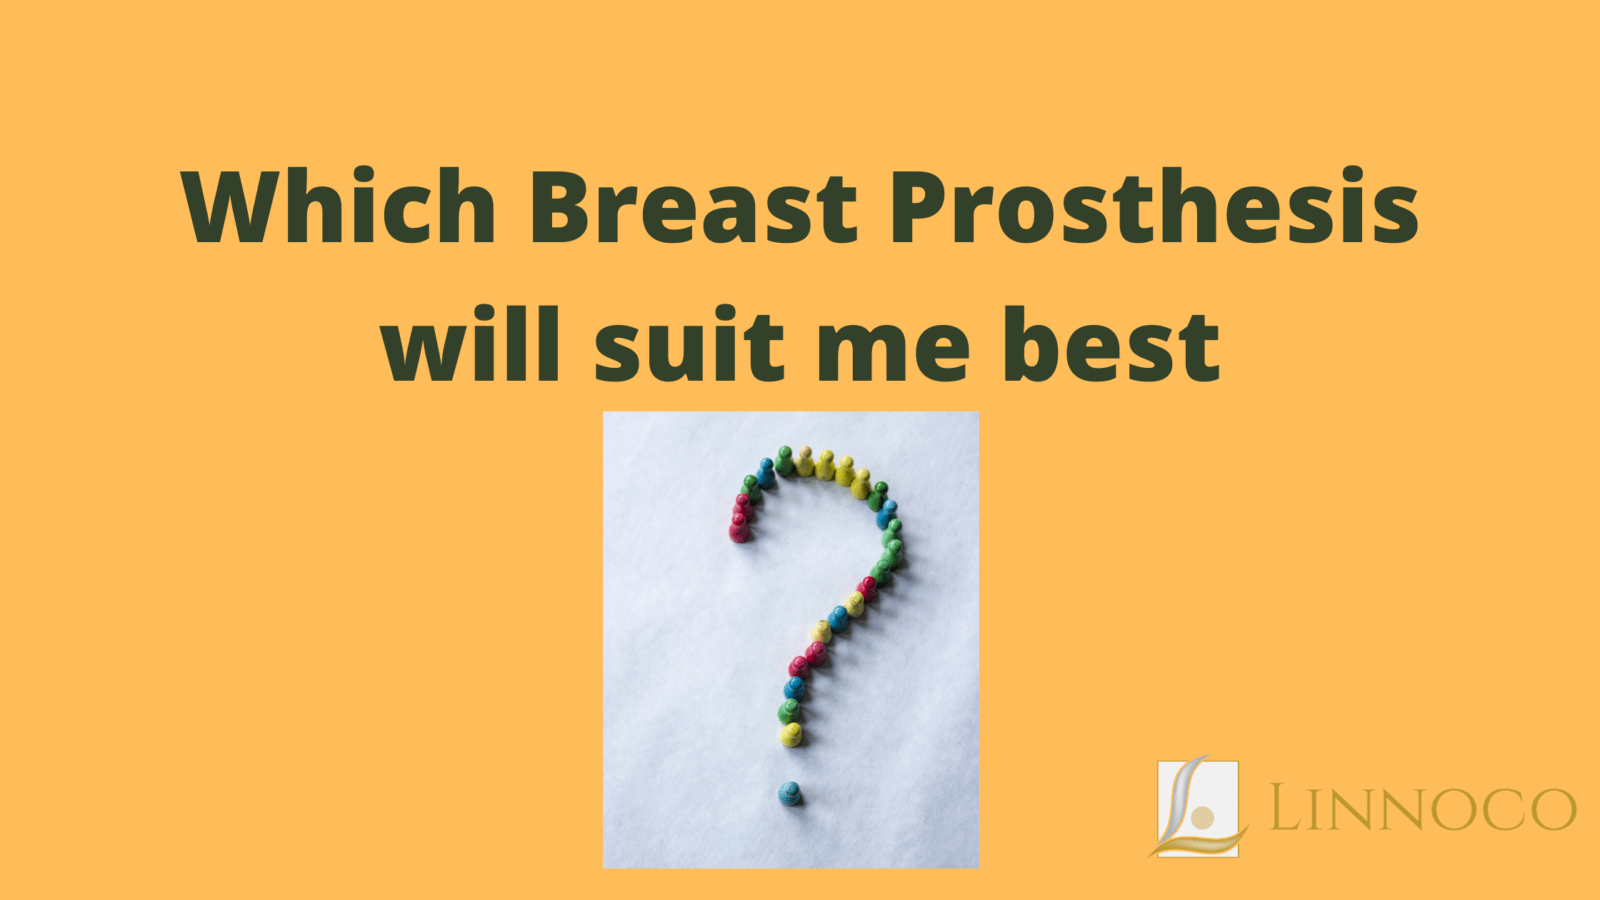 Which breast prosthesis will suit me best